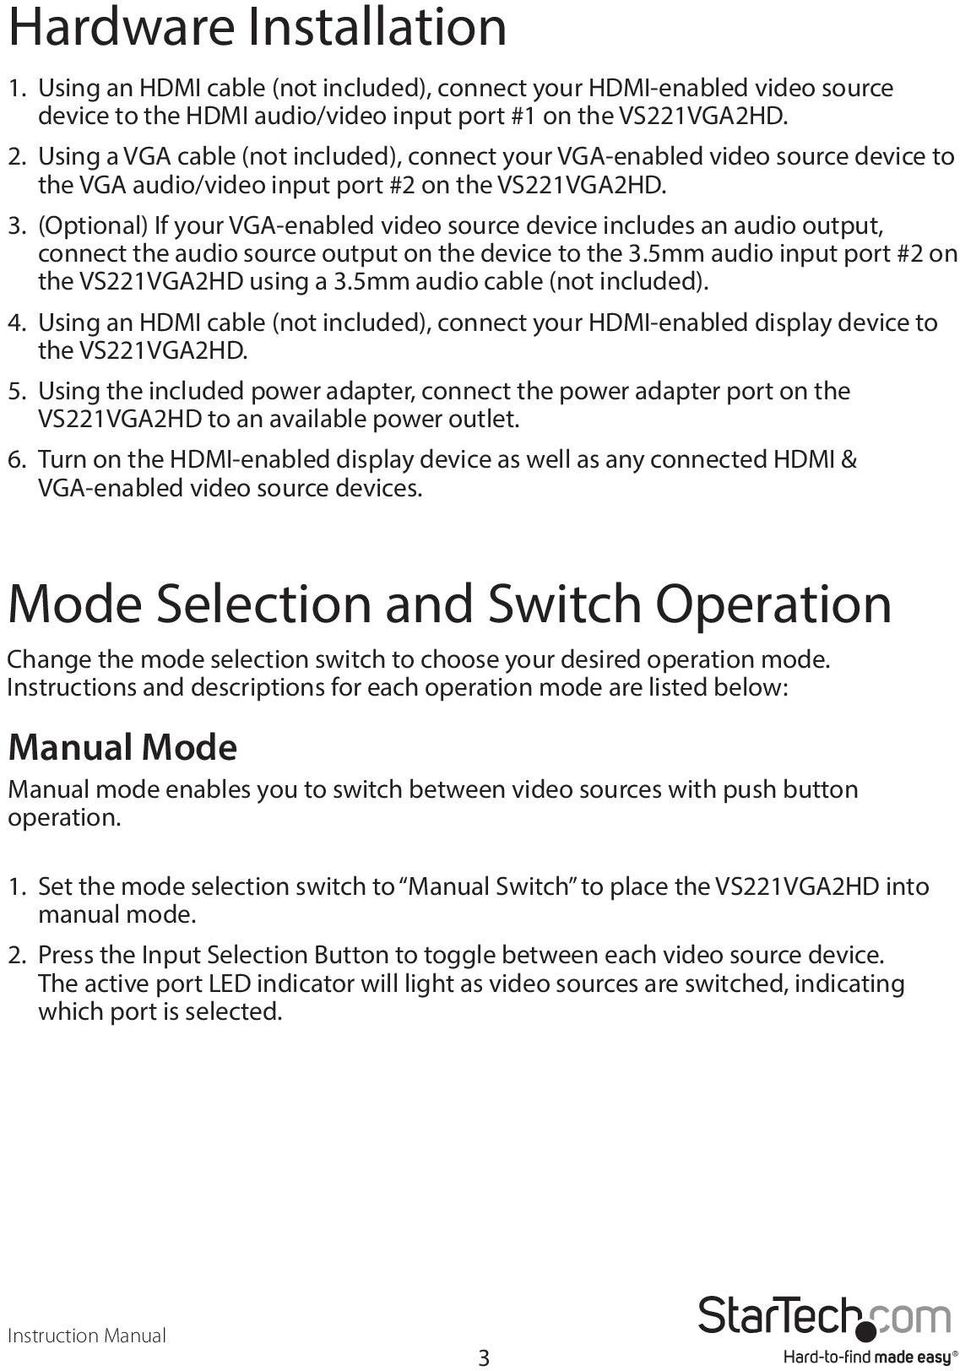 (Optional) If your VGA-enabled video source device includes an audio output, connect the audio source output on the device to the 3.5mm audio input port #2 on the VS221VGA2HD using a 3.